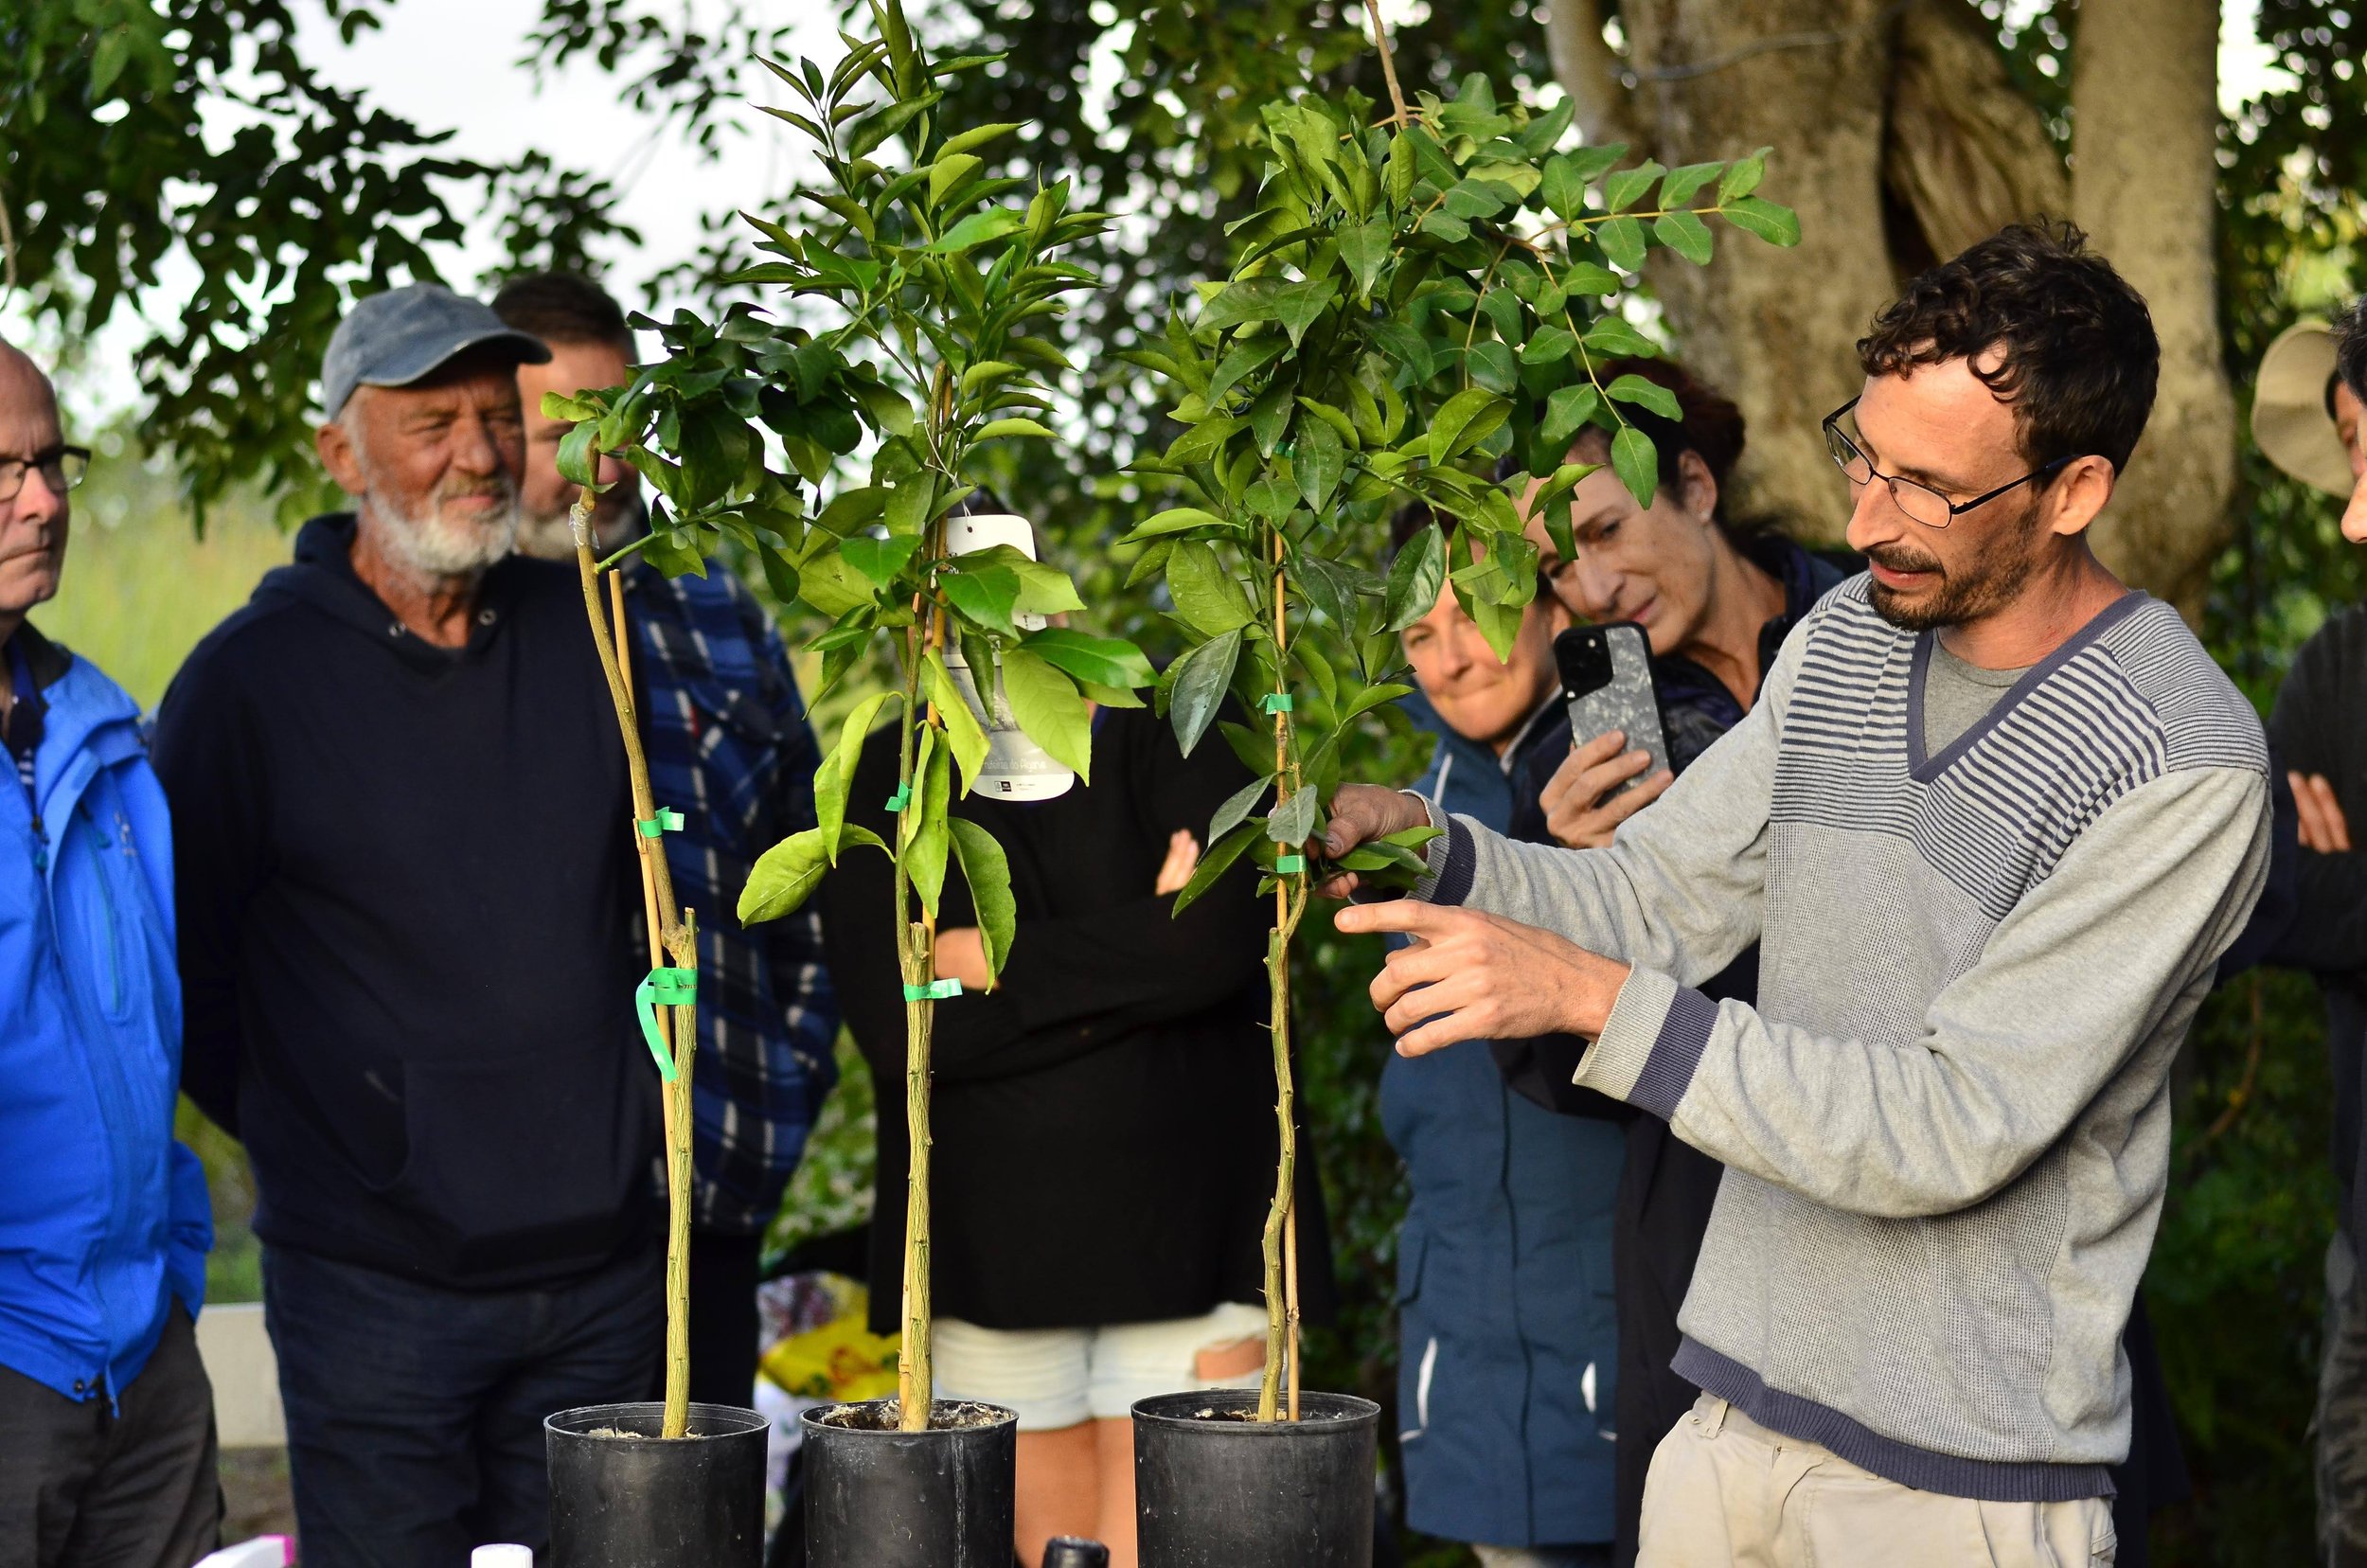 Dror AVITAL explaining the principles of fruit tree pruning and grafting during a workshop at Orchard of Flavours botanical garden